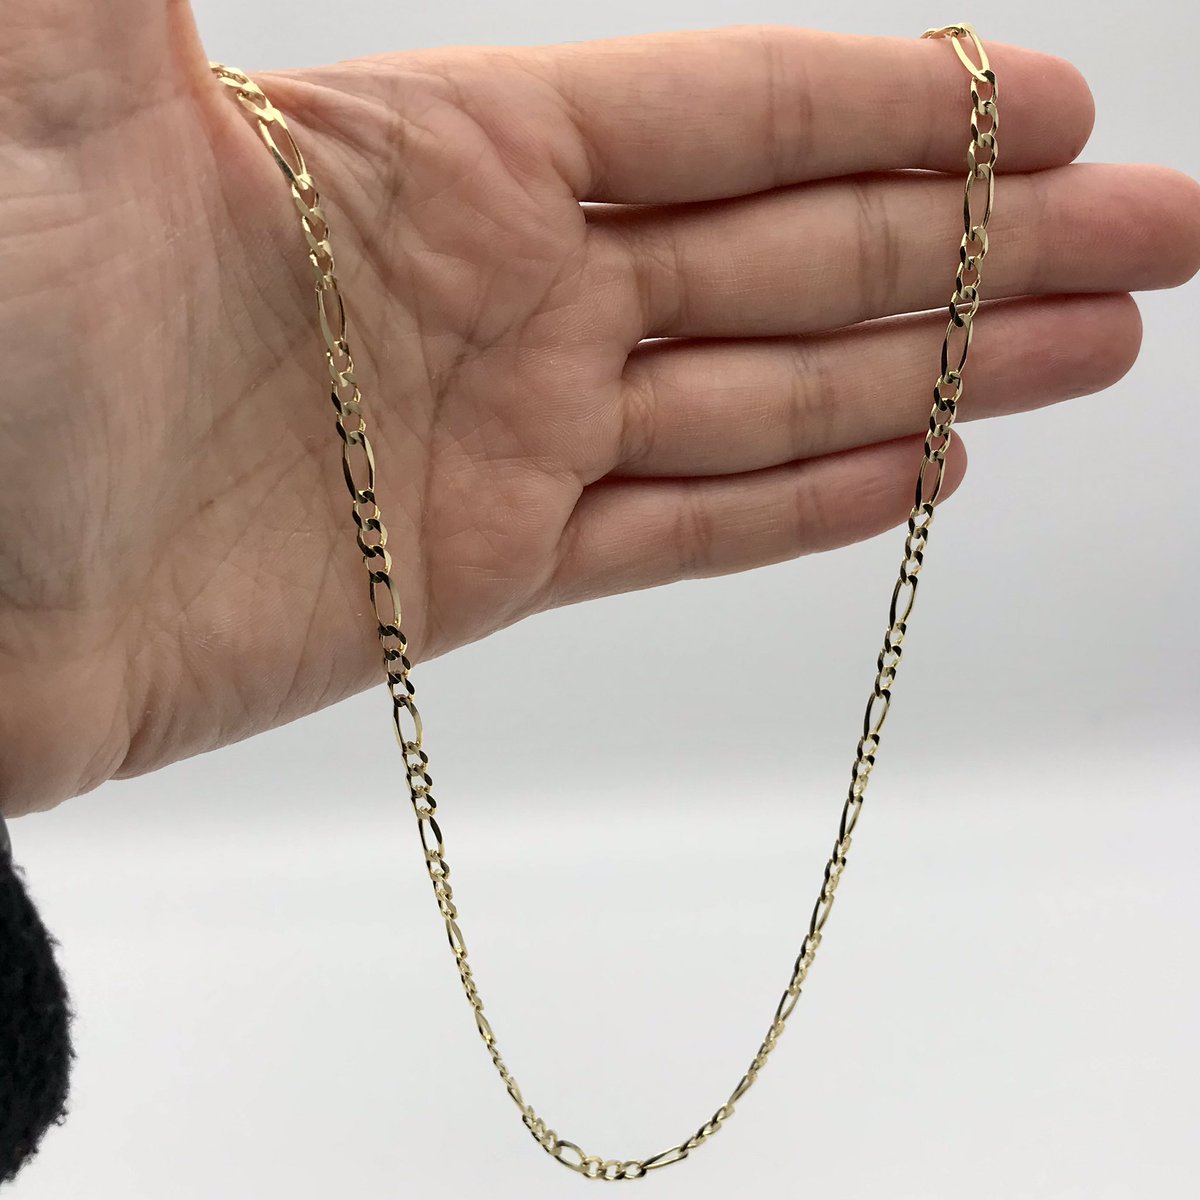 Available now! 22 inch 14k gold figaro chain! Weighs 10.8 grams and is 3.75mm wide! Yours for $999.99! #pawnshop #oakland #sanfrancisco #bayarea #sfbayarea #eastbay #supportsmallbusiness #supportlocal #pawnshopfinds #pawnshopdeals #bestcollateral #gold #goldchain #figarochain